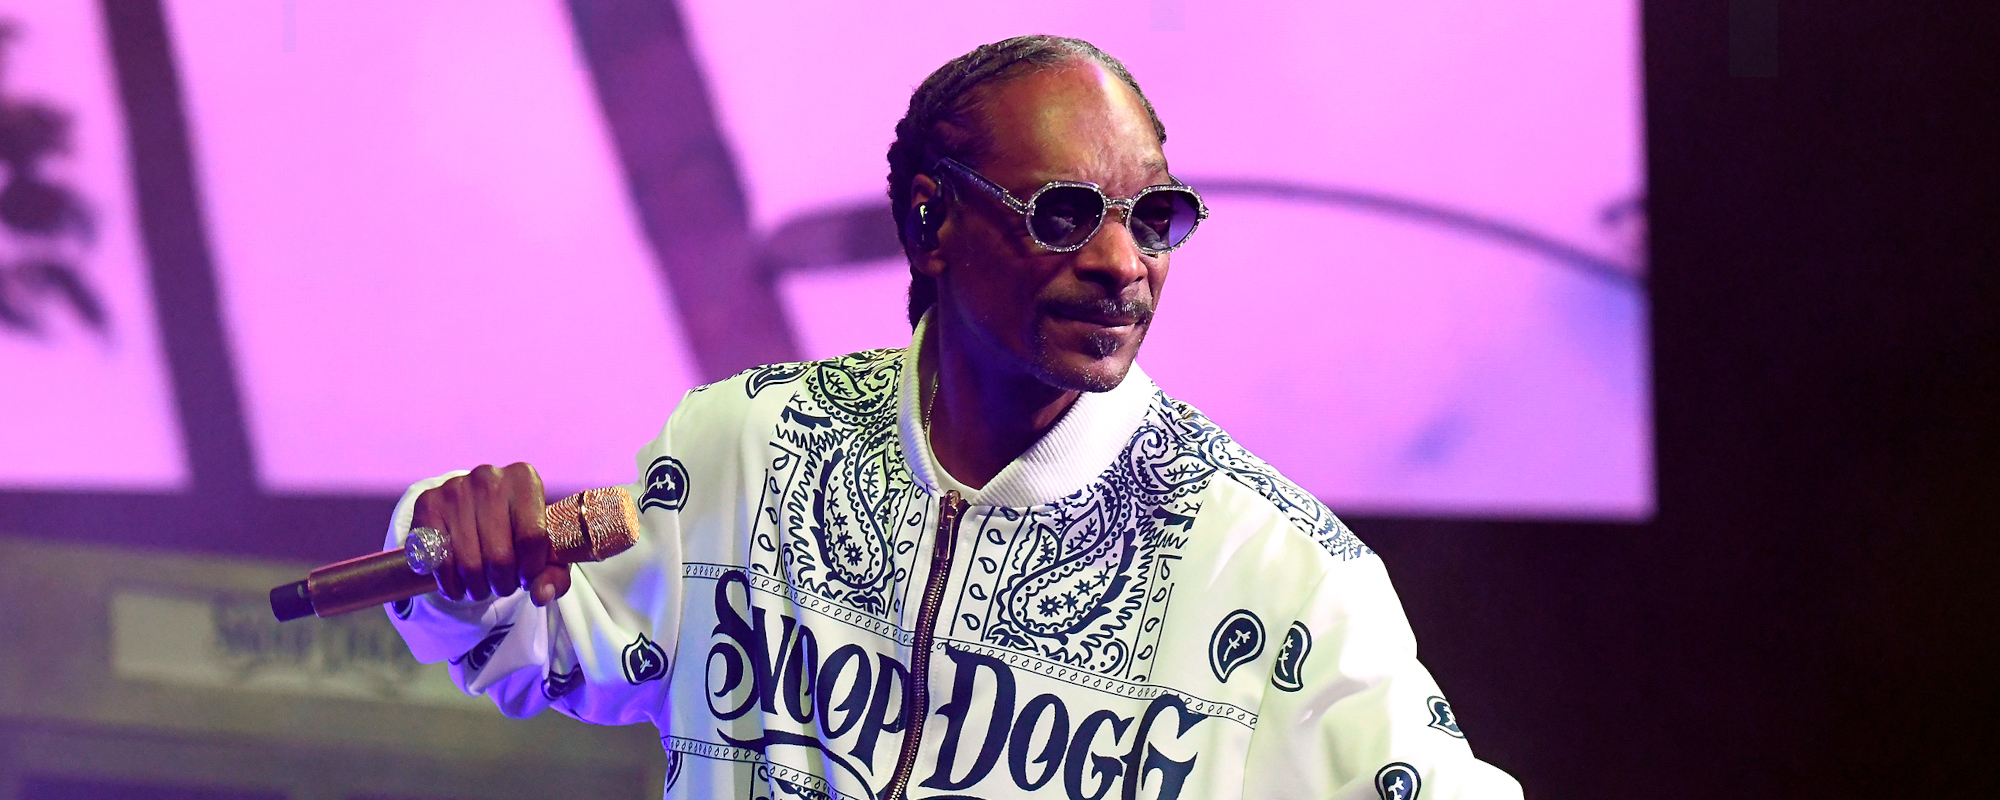 5 Things to Know About Snoop Dogg